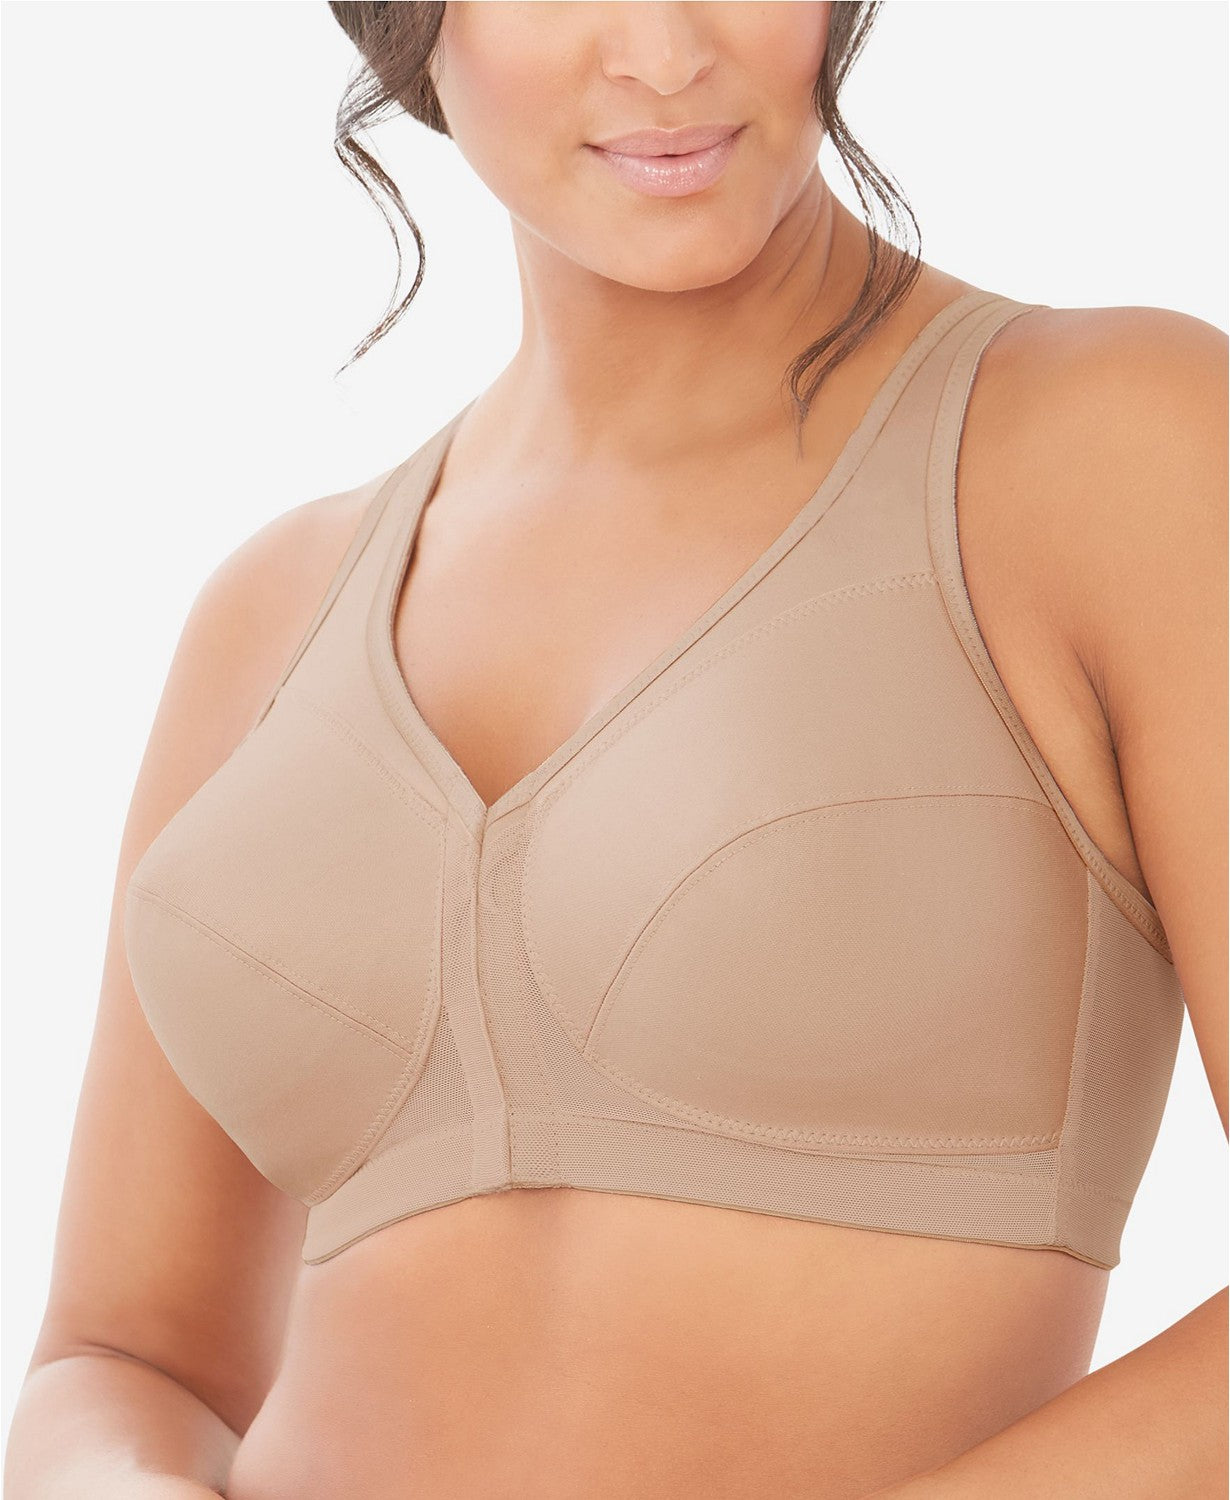 Glamorise MagicLift Front-Closure Wire-free Posture Back Bra - Cafe